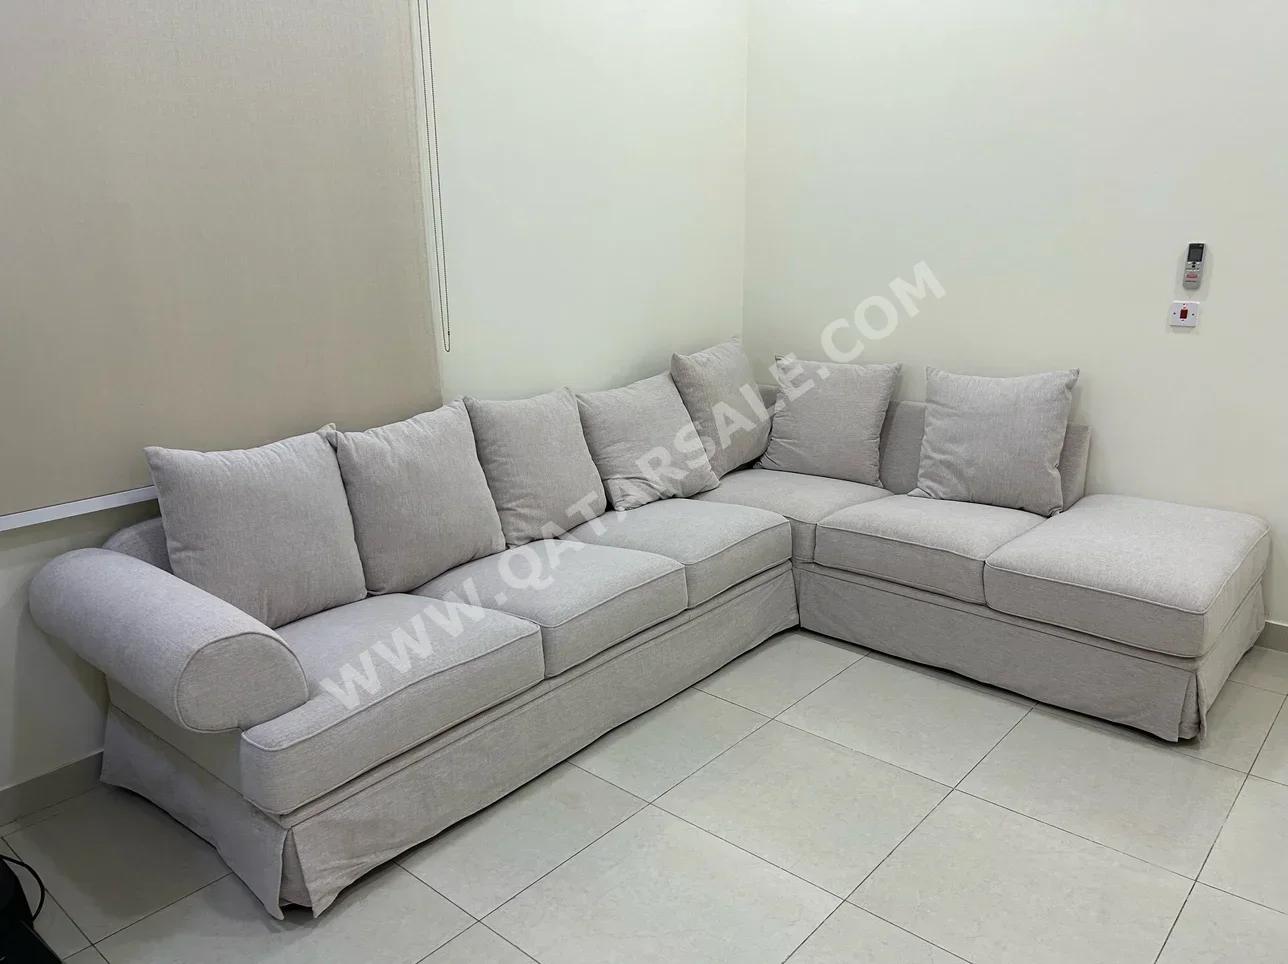 Sofas, Couches & Chairs Homes r Us  L shape  - Gray  - Sofa Bed